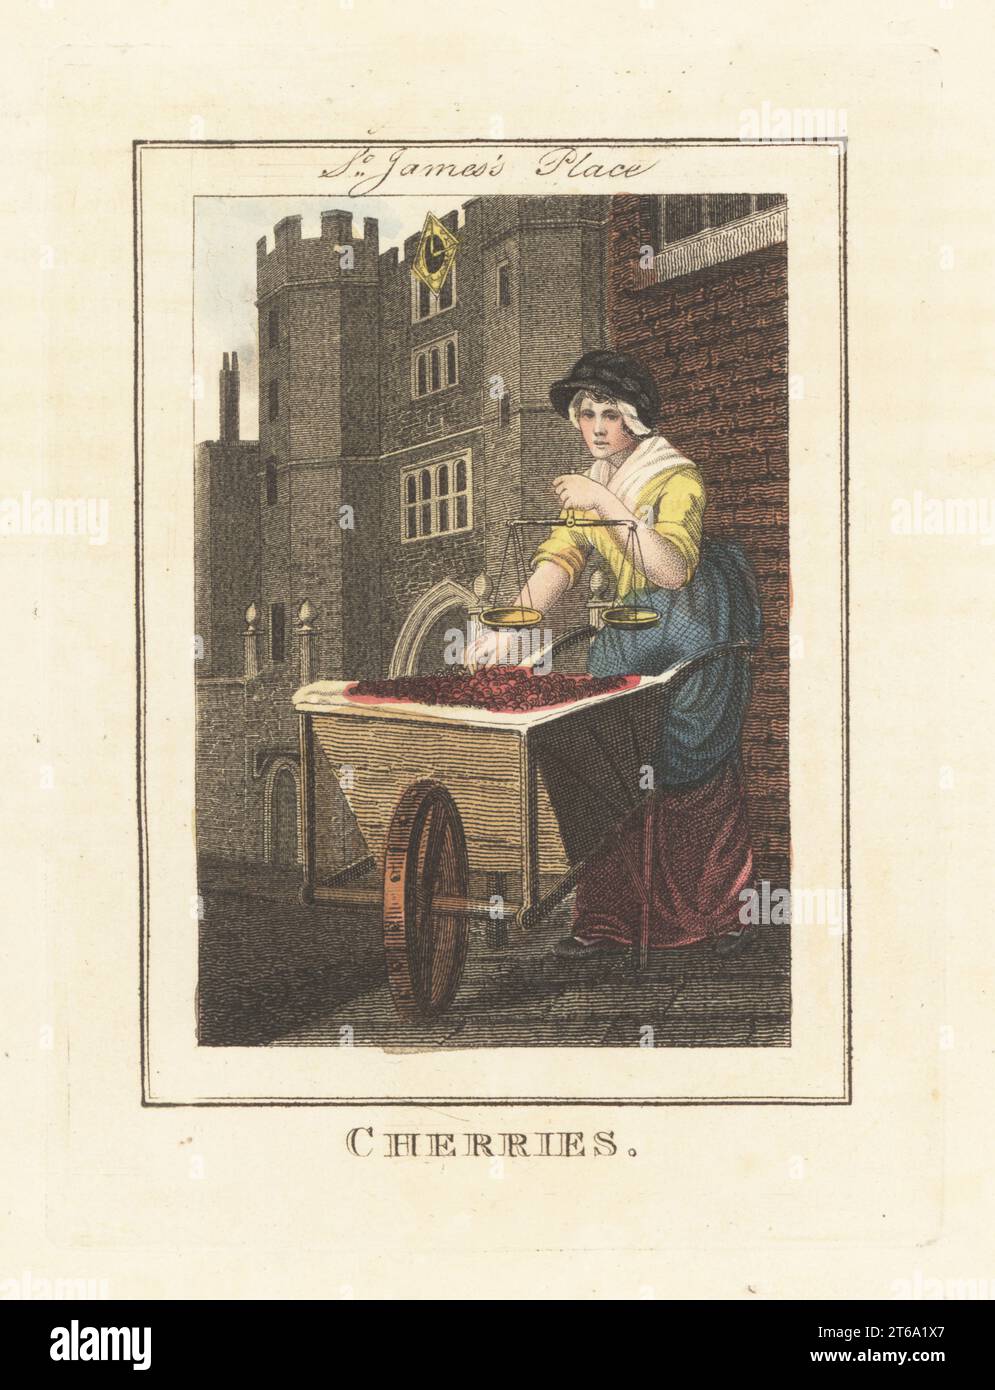 Cherry seller in front of St. James's Place. Woman in bonnet, fichu and dress holding scales above a wheelbarrow of cherries in June. Entrance to St. James's Palace on Pall Mall. Handcoloured copperplate engraving by Edward Edwards after an illustration by William Marshall Craig from Description of the Plates Representing the Itinerant Traders of London, Richard Phillips, No. 71 St Pauls Churchyard, London, 1805. Stock Photo